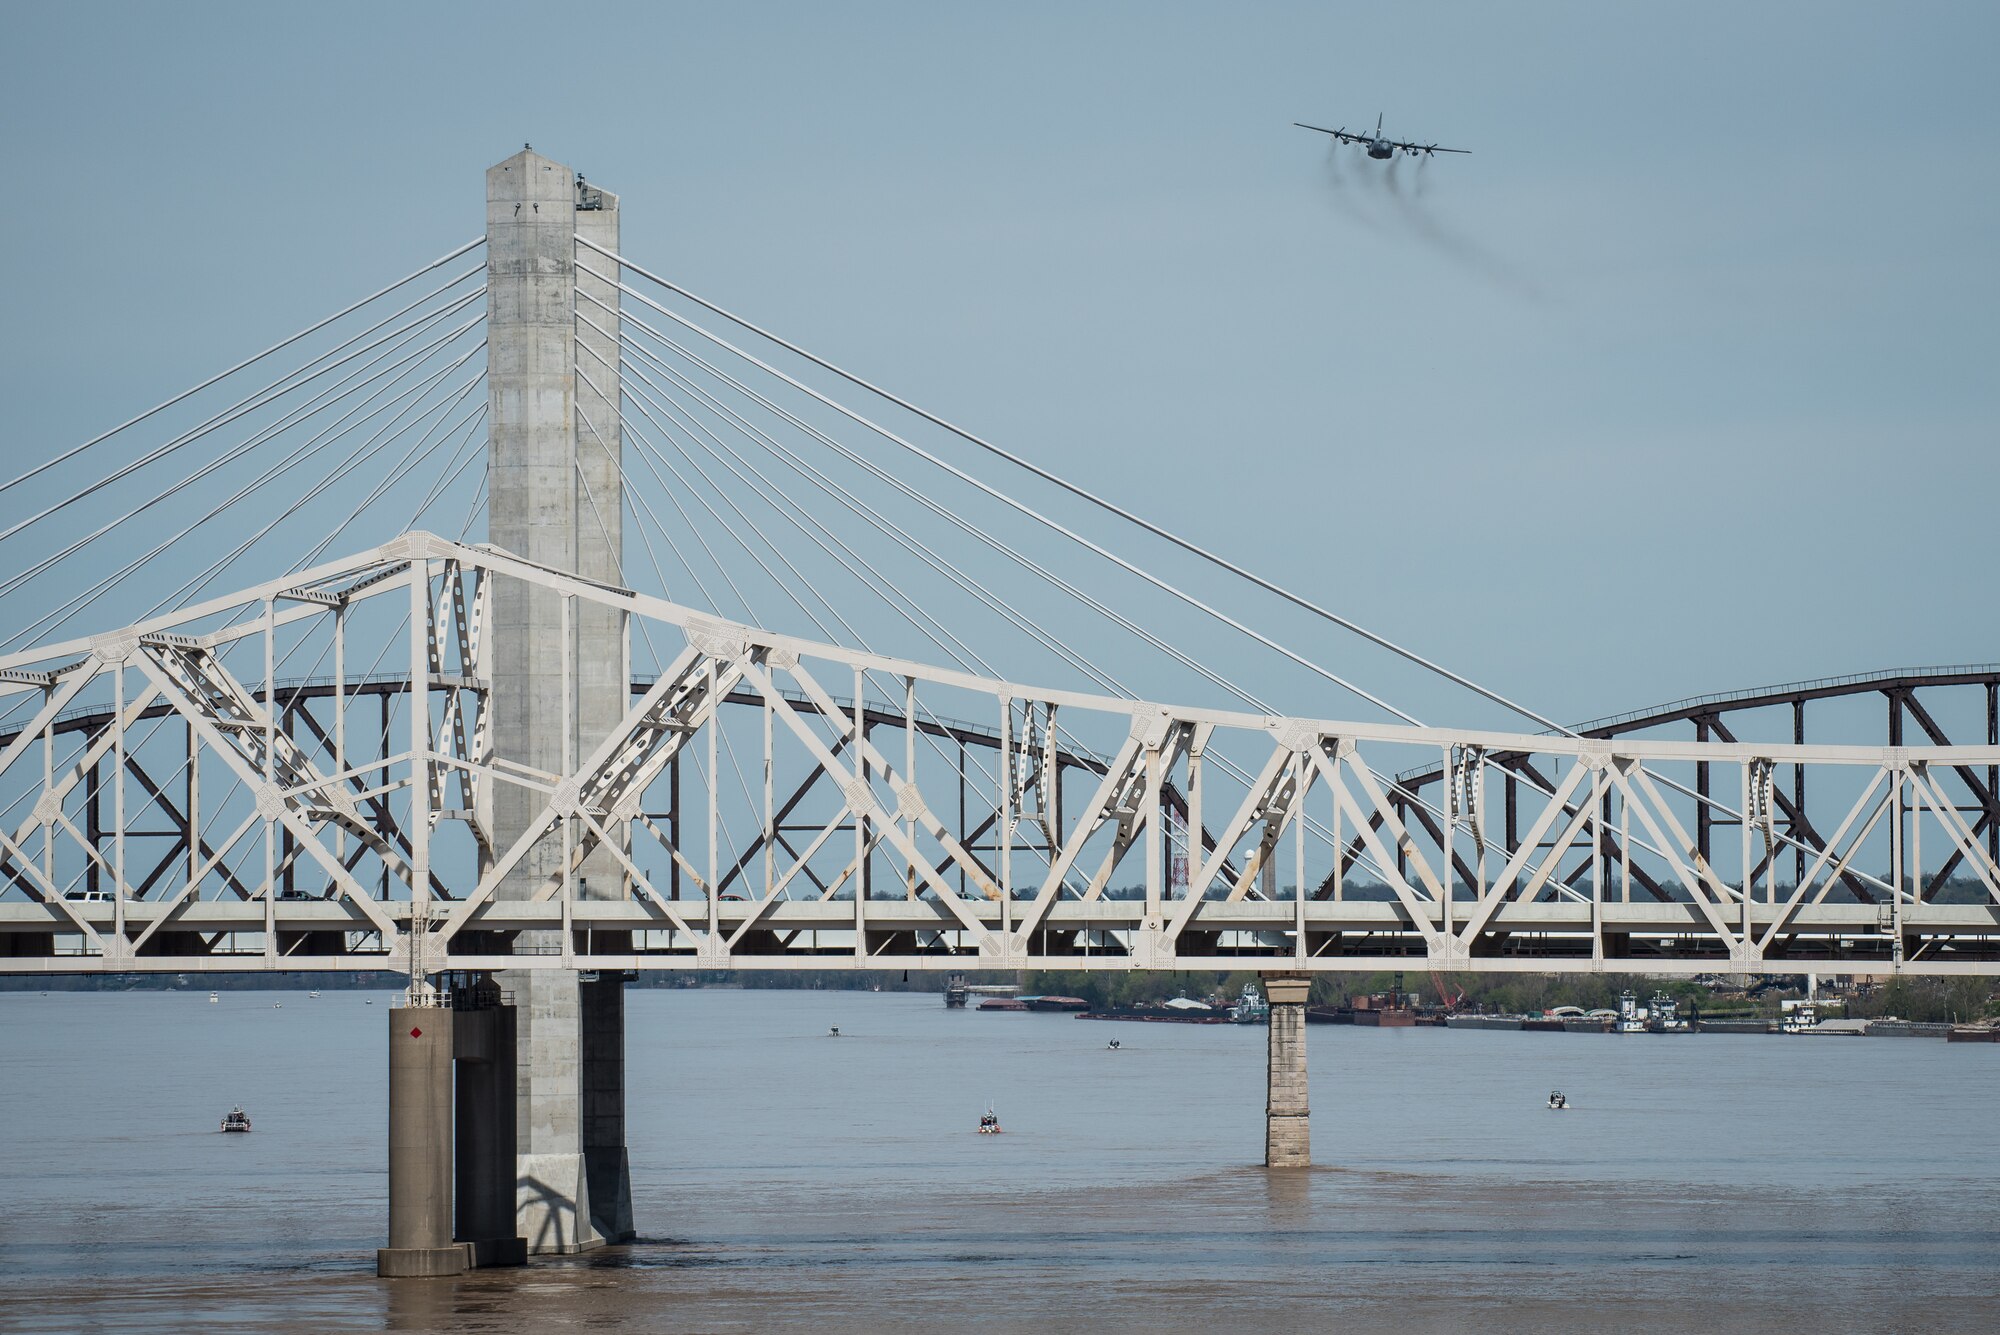 A Kentucky Air National Guard C-130 Hercules aircraft flies an aerial demonstration over the Ohio River April 21, 2018, during the Thunder Over Louisville air show in Louisville, Ky. The Kentucky Air Guard once again served as the base of operations for military aircraft participating in the show, providing essential maintenance and logistical support. (U.S. Air National Guard photo by Lt. Col. Dale Greer)